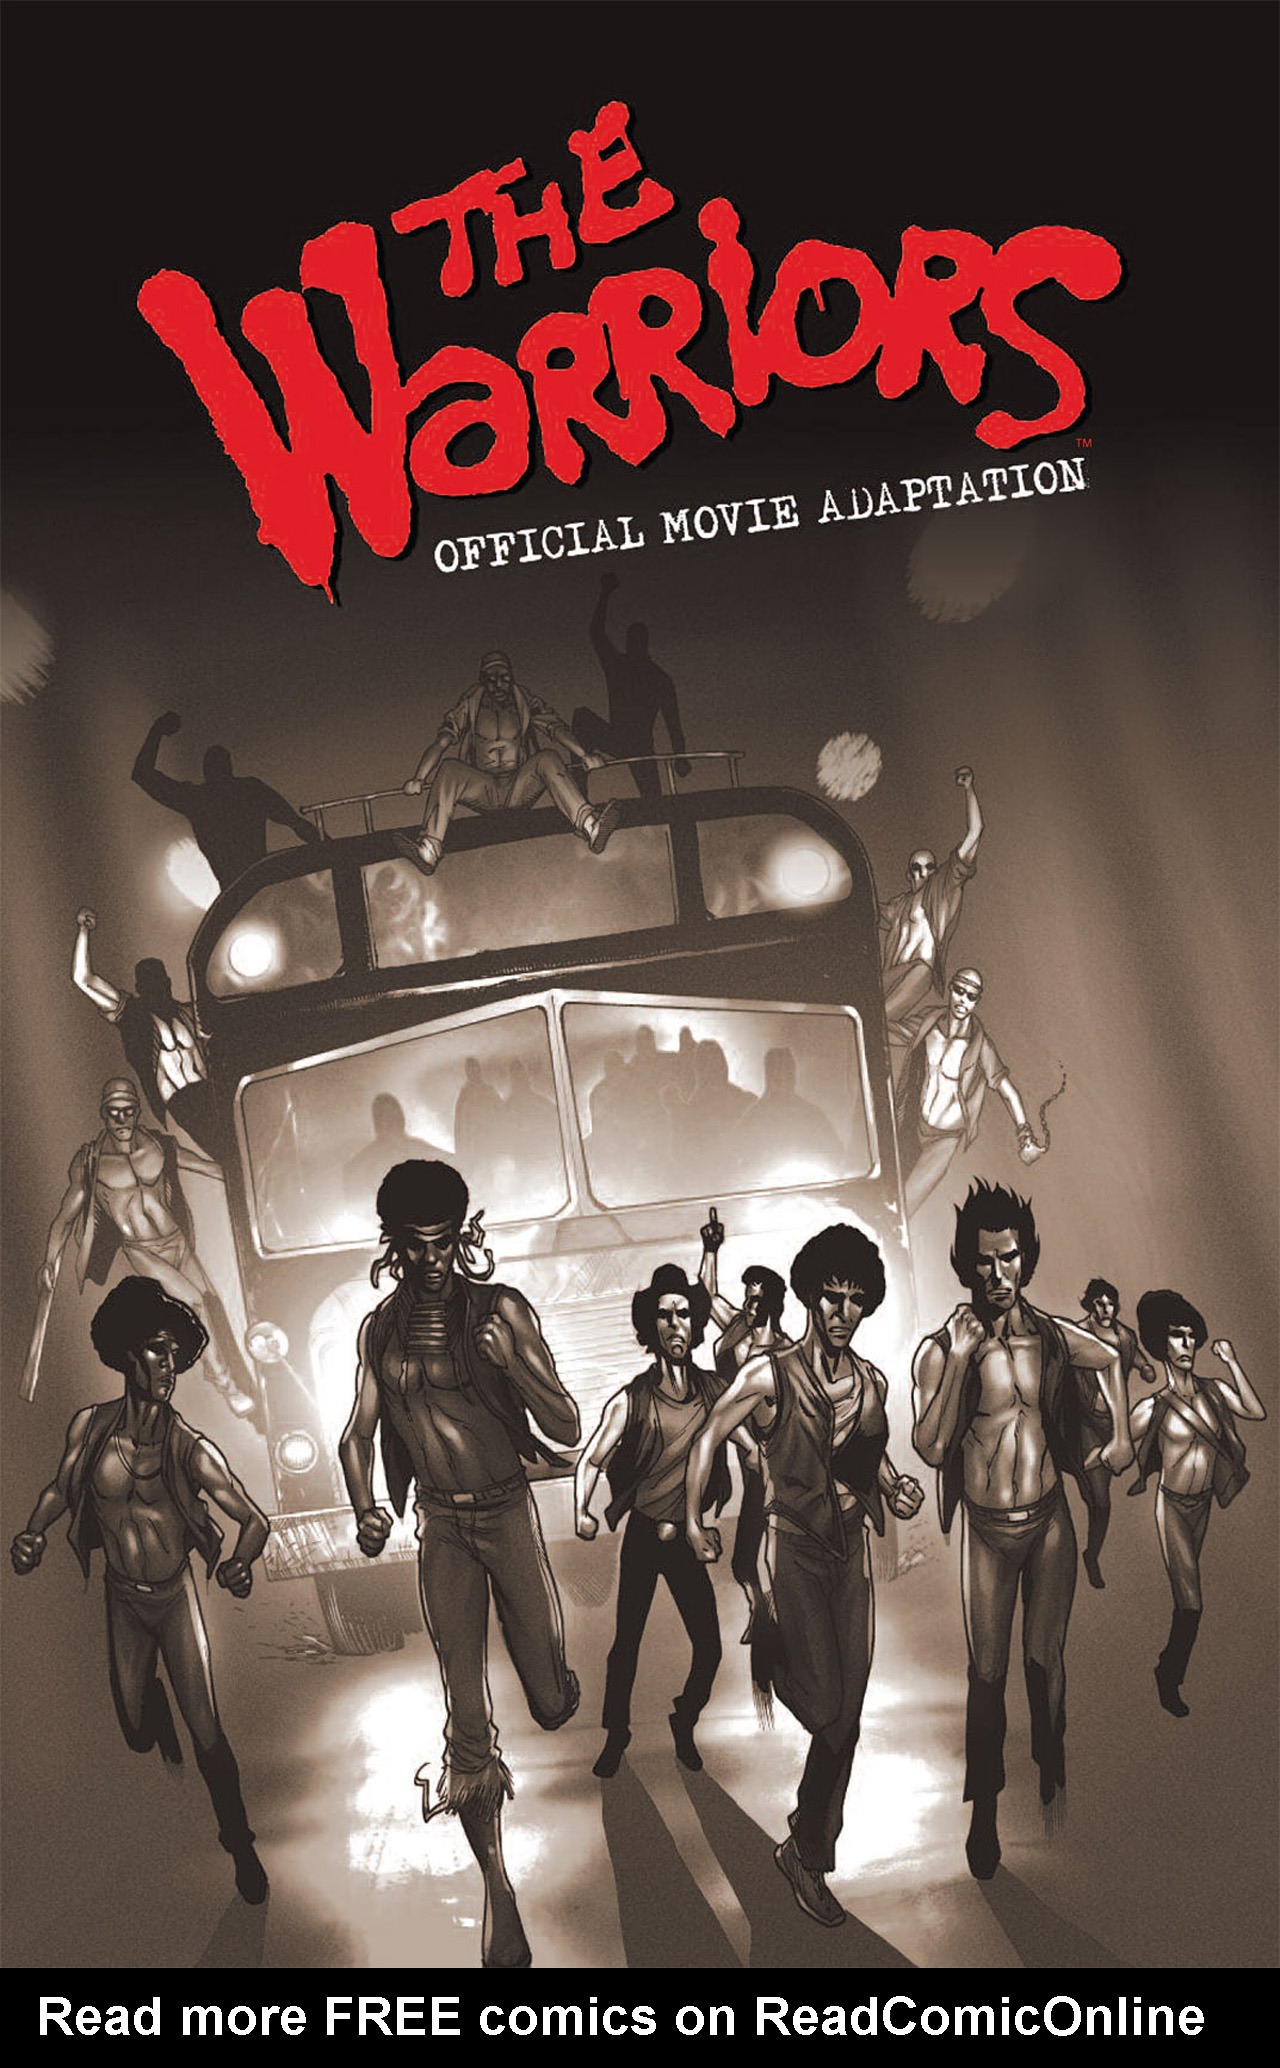 Read online The Warriors: Official Movie Adaptation comic -  Issue # TPB - 2